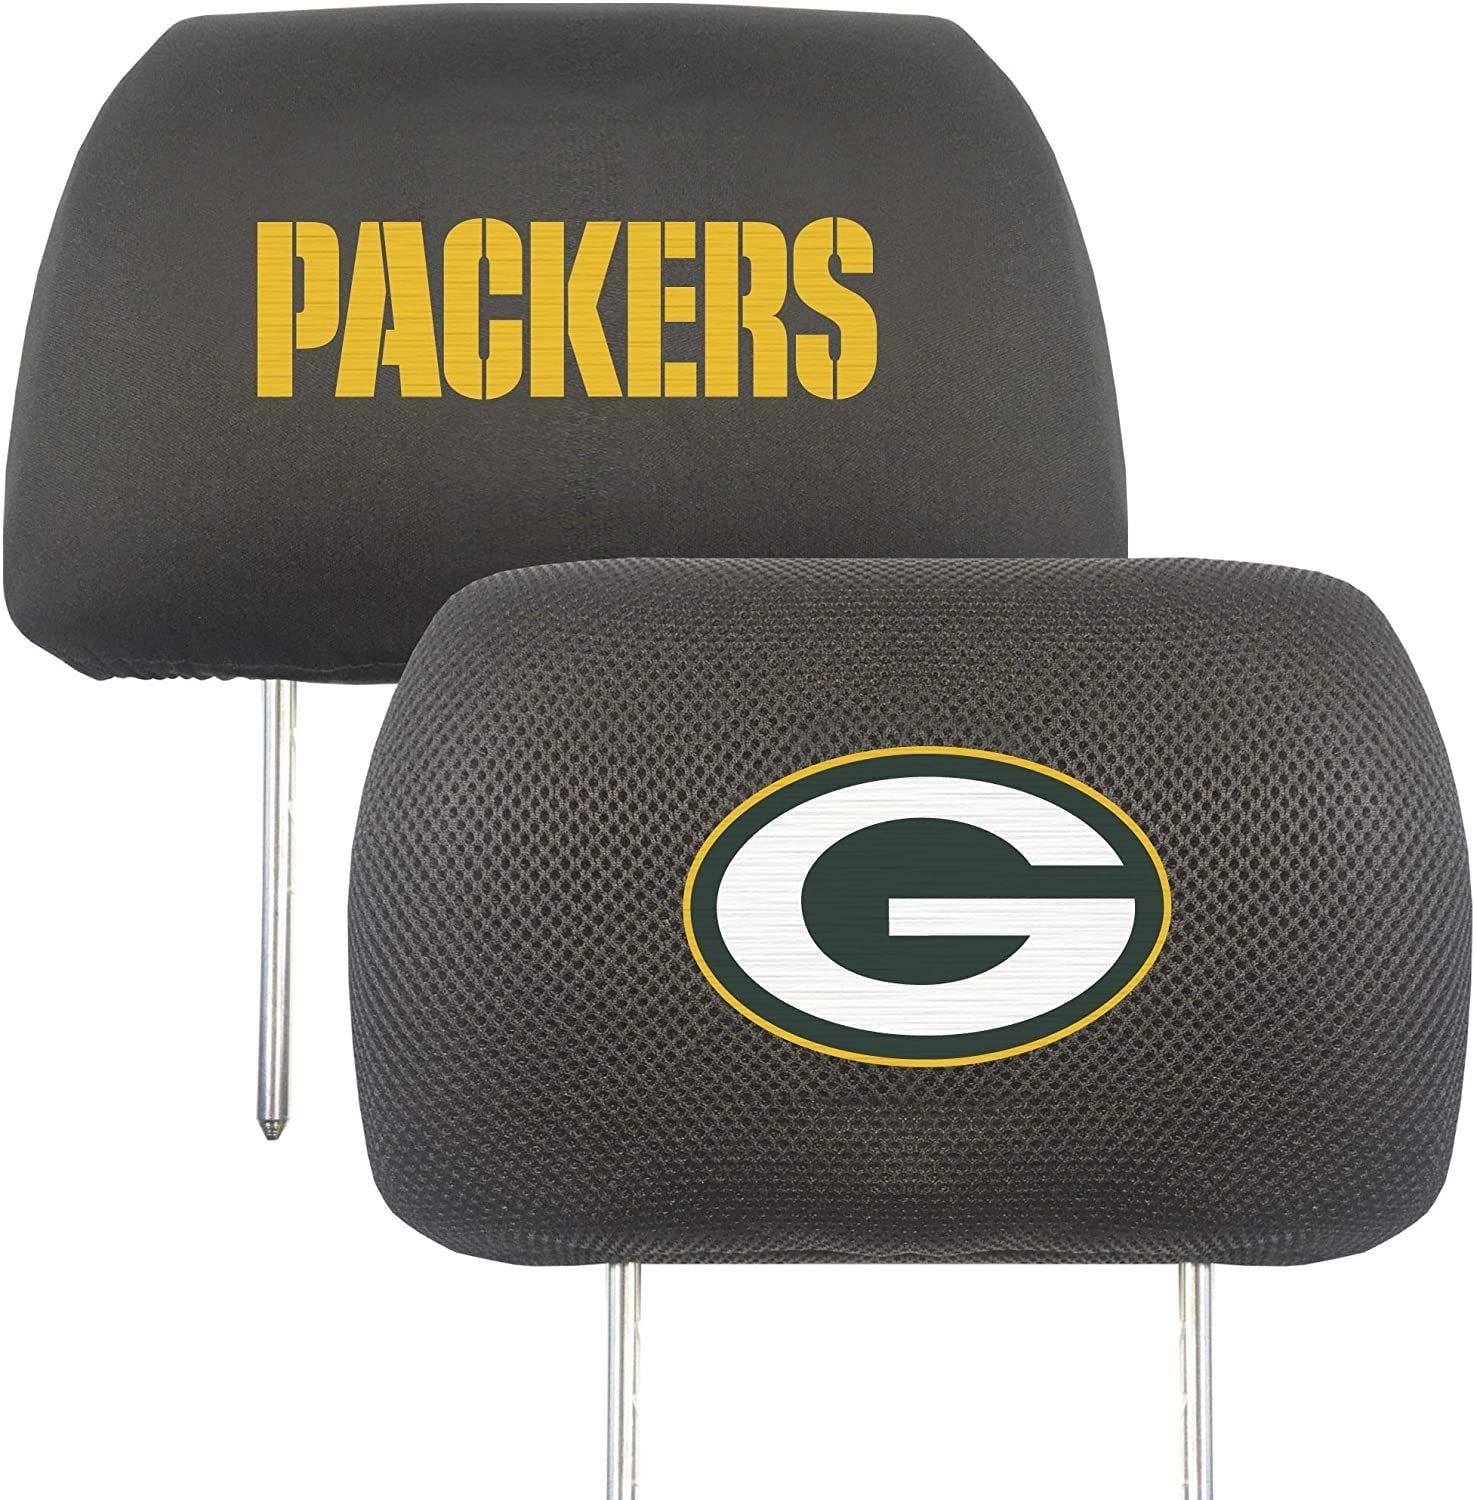 Green Bay Packers Pair of Premium Auto Head Rest Covers, Embroidered, Black Elastic, 14x10 Inch